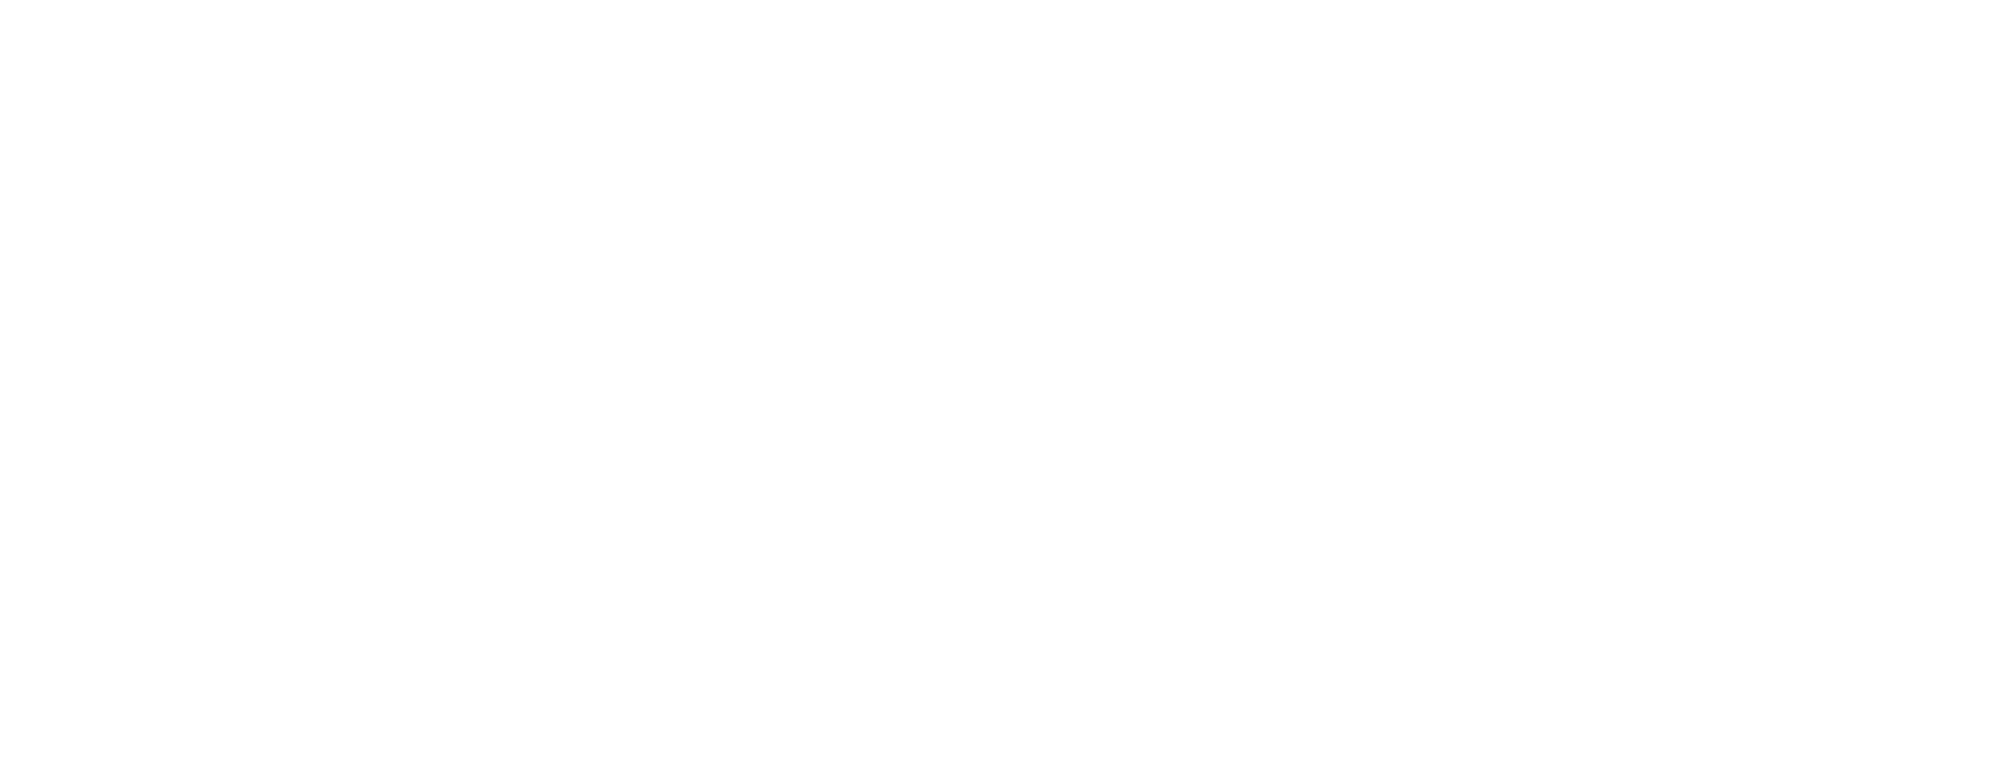 OpenFF Toolkit 0.12.1+0.ge05c8766.dirty documentation logo